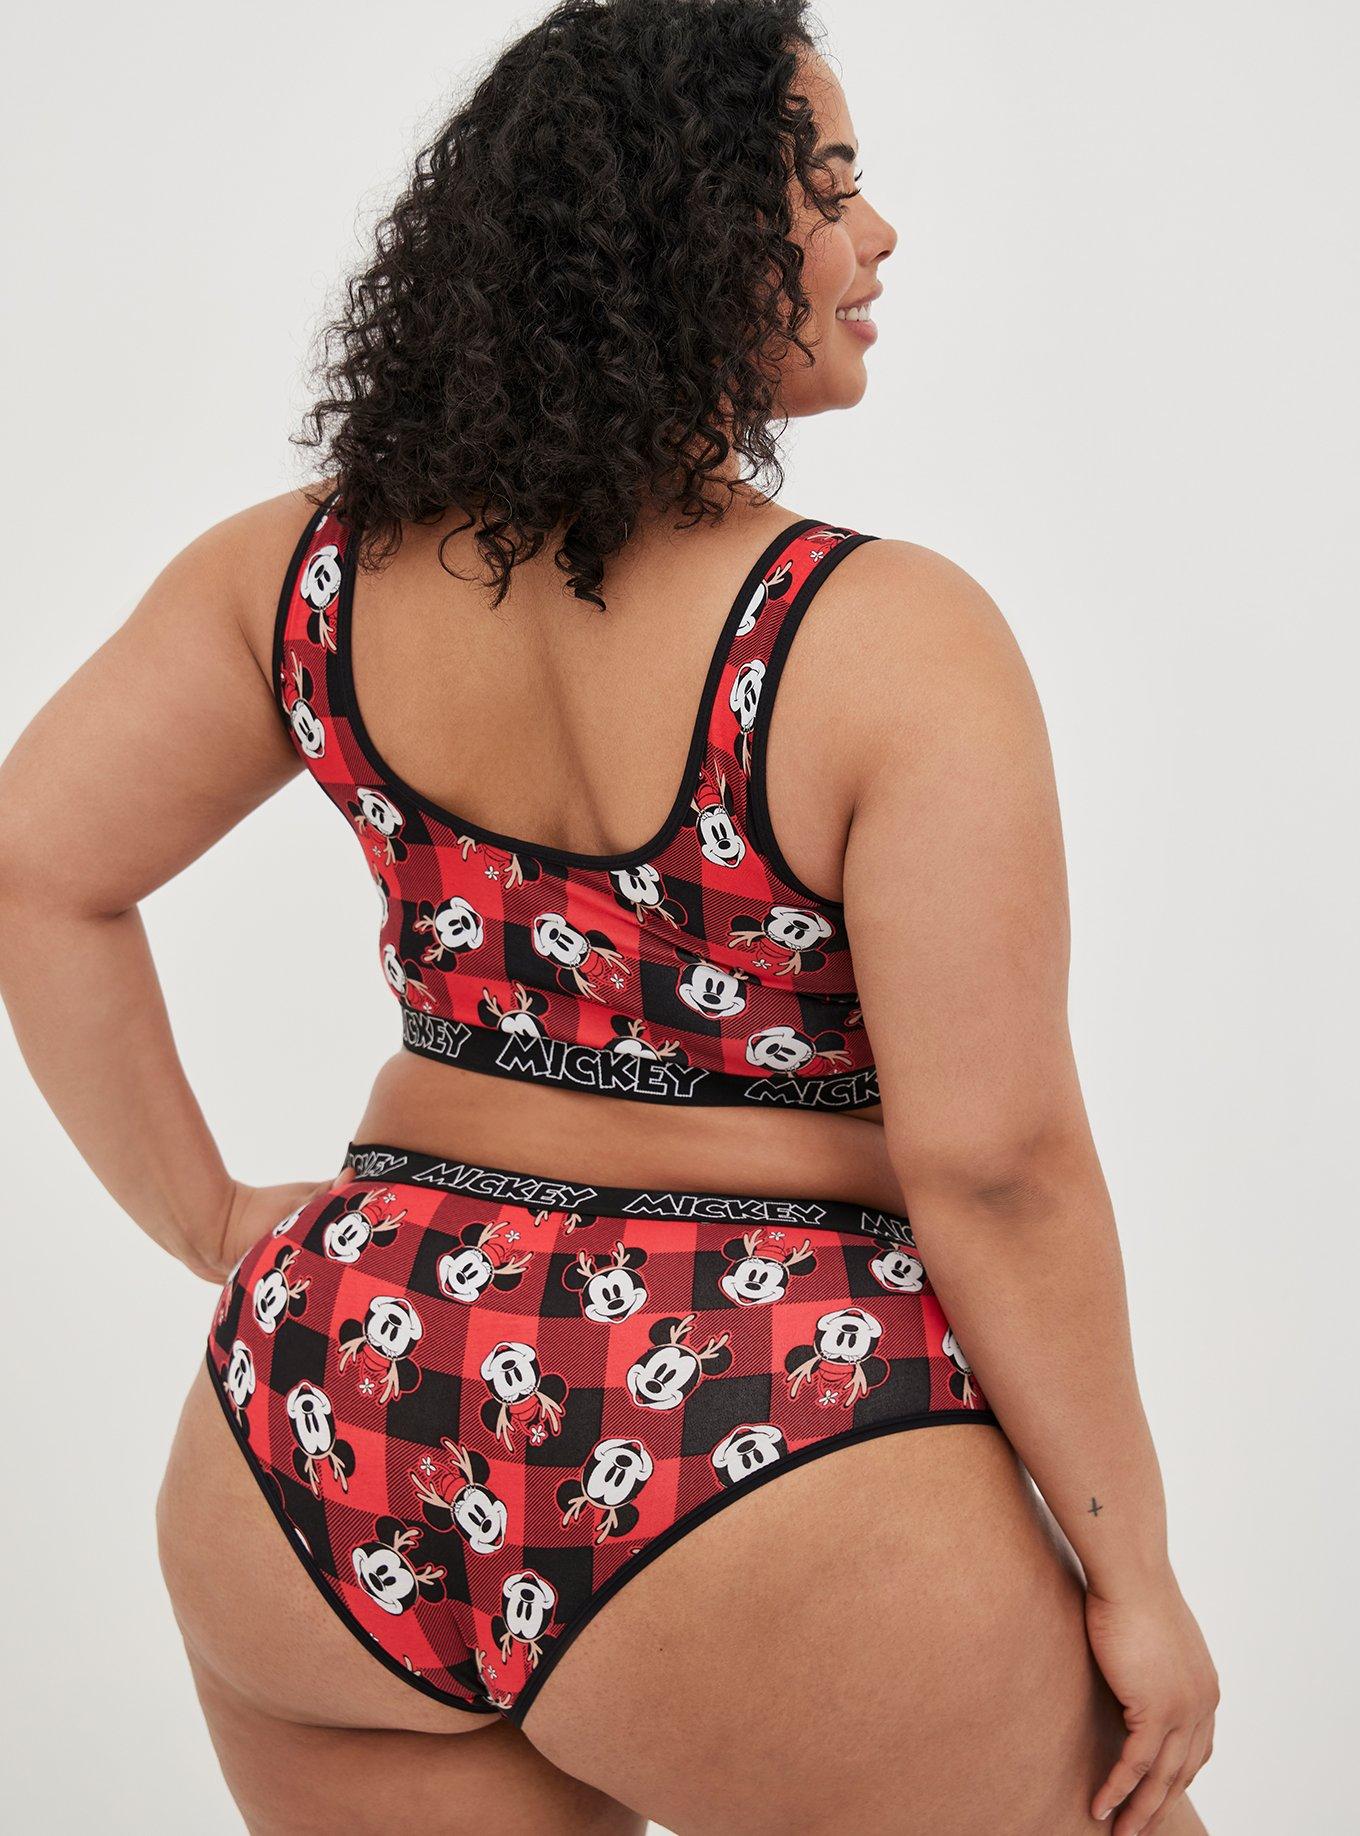 Plus Size - Disney Cheeky Panty - Cotton Mickey Mouse Plaid Red